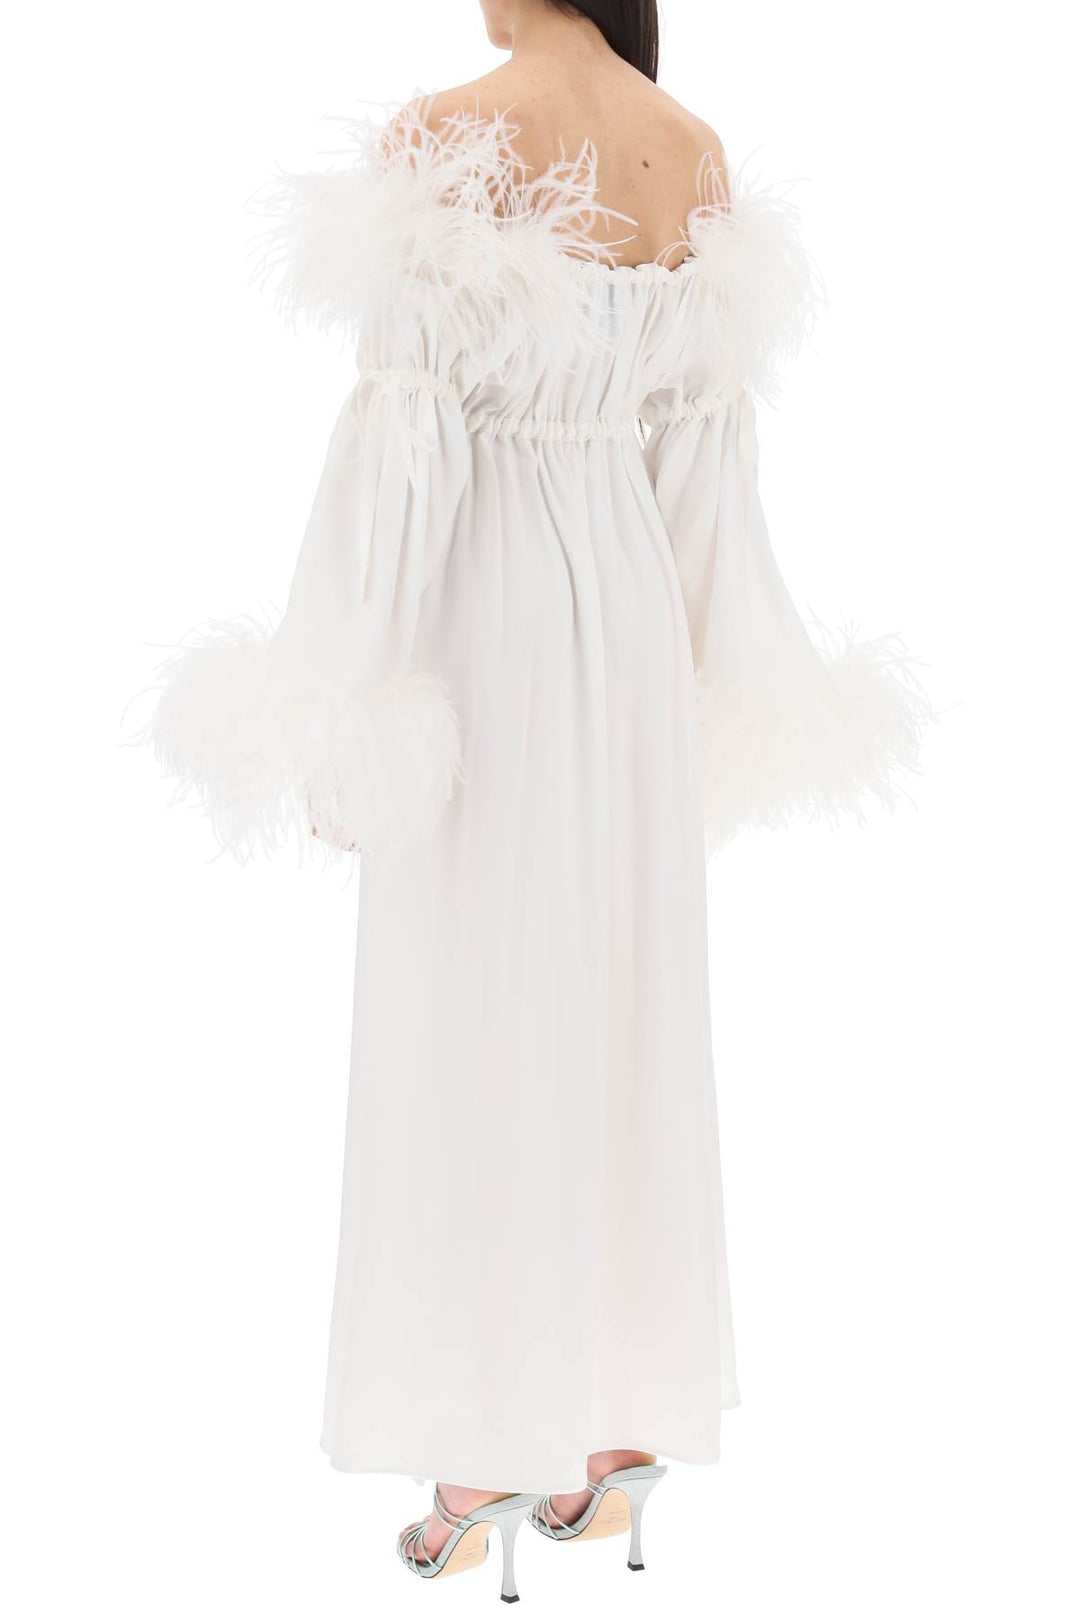 Art Dealer 'Bettina' Maxi Dress In Satin With Feathers   Bianco